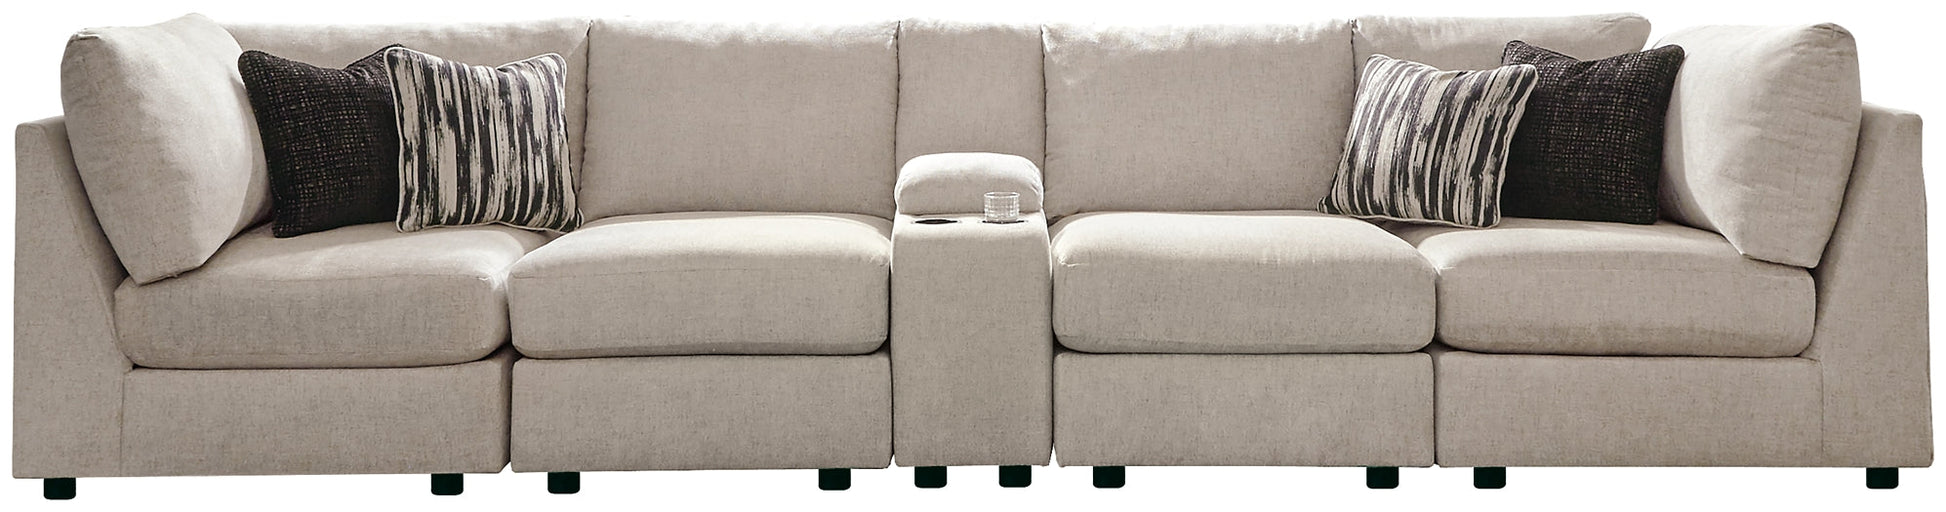 Kellway 5-Piece Sectional Smyrna Furniture Outlet